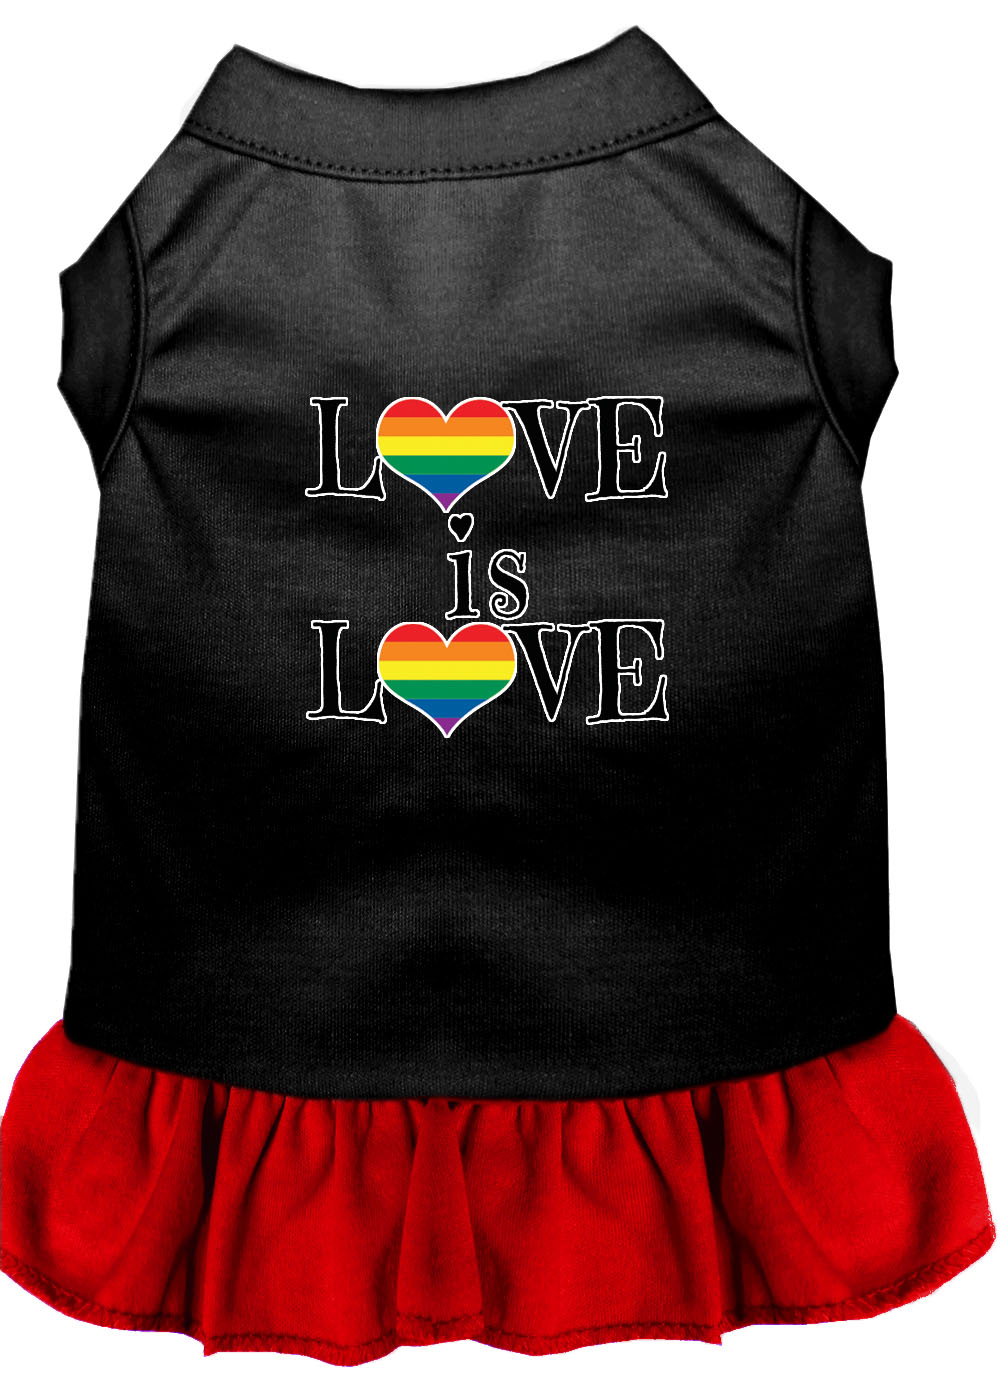 Love is Love Screen Print Dog Dress Black with Red Sm